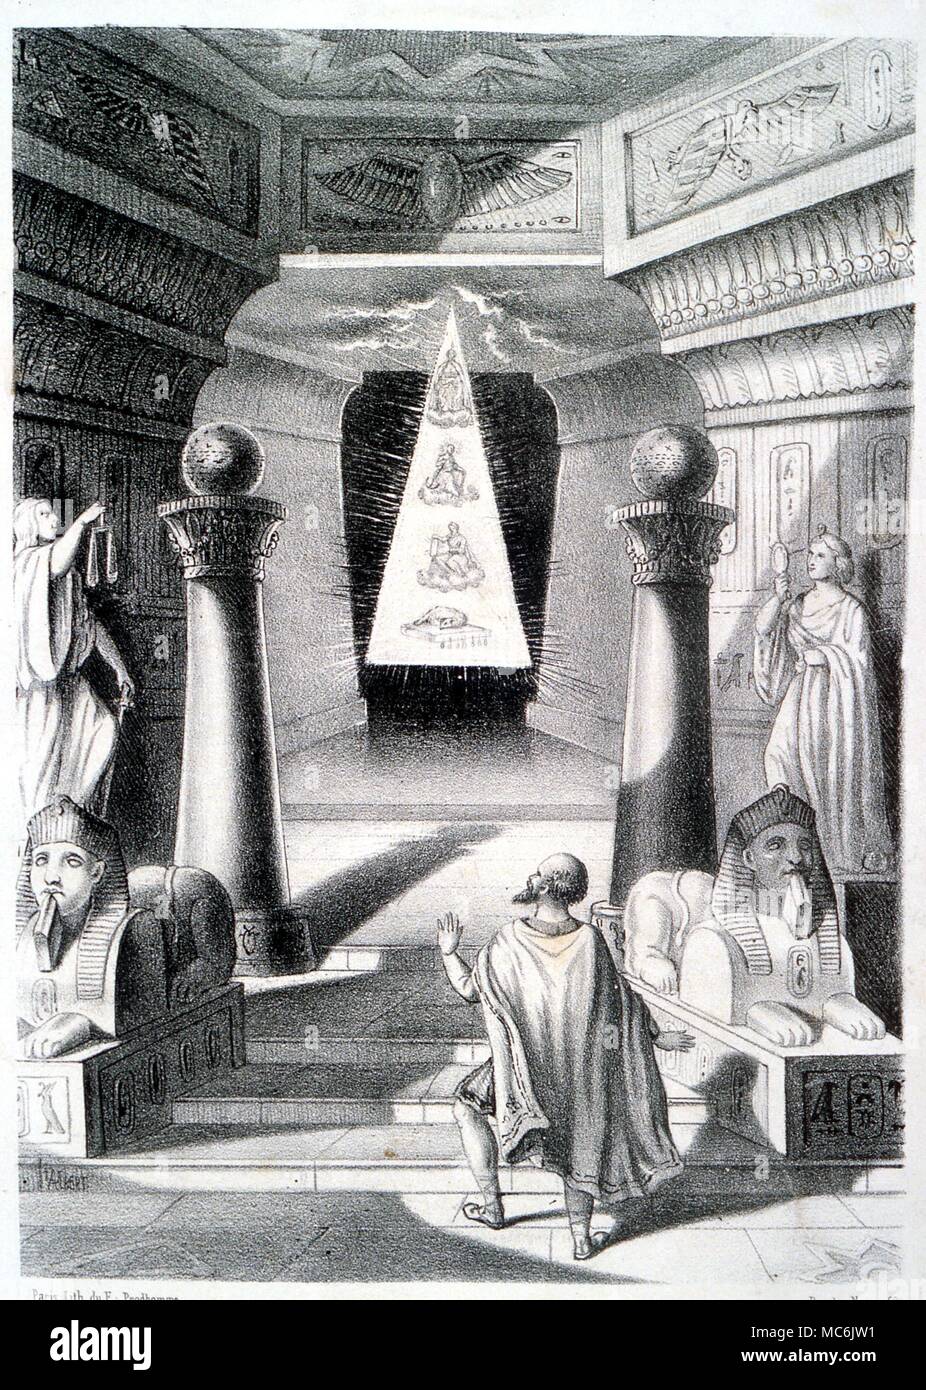 MASONRY - THE TWO COLUMNS AND TRIANGLE. Lithograph showing the esoteric symbols of Masonry, including the two columns which front the Temple of Solomon, and the radiant triangle. From the 1860 ed. of Le Soleil Mystique, a French Masonic journal Stock Photo